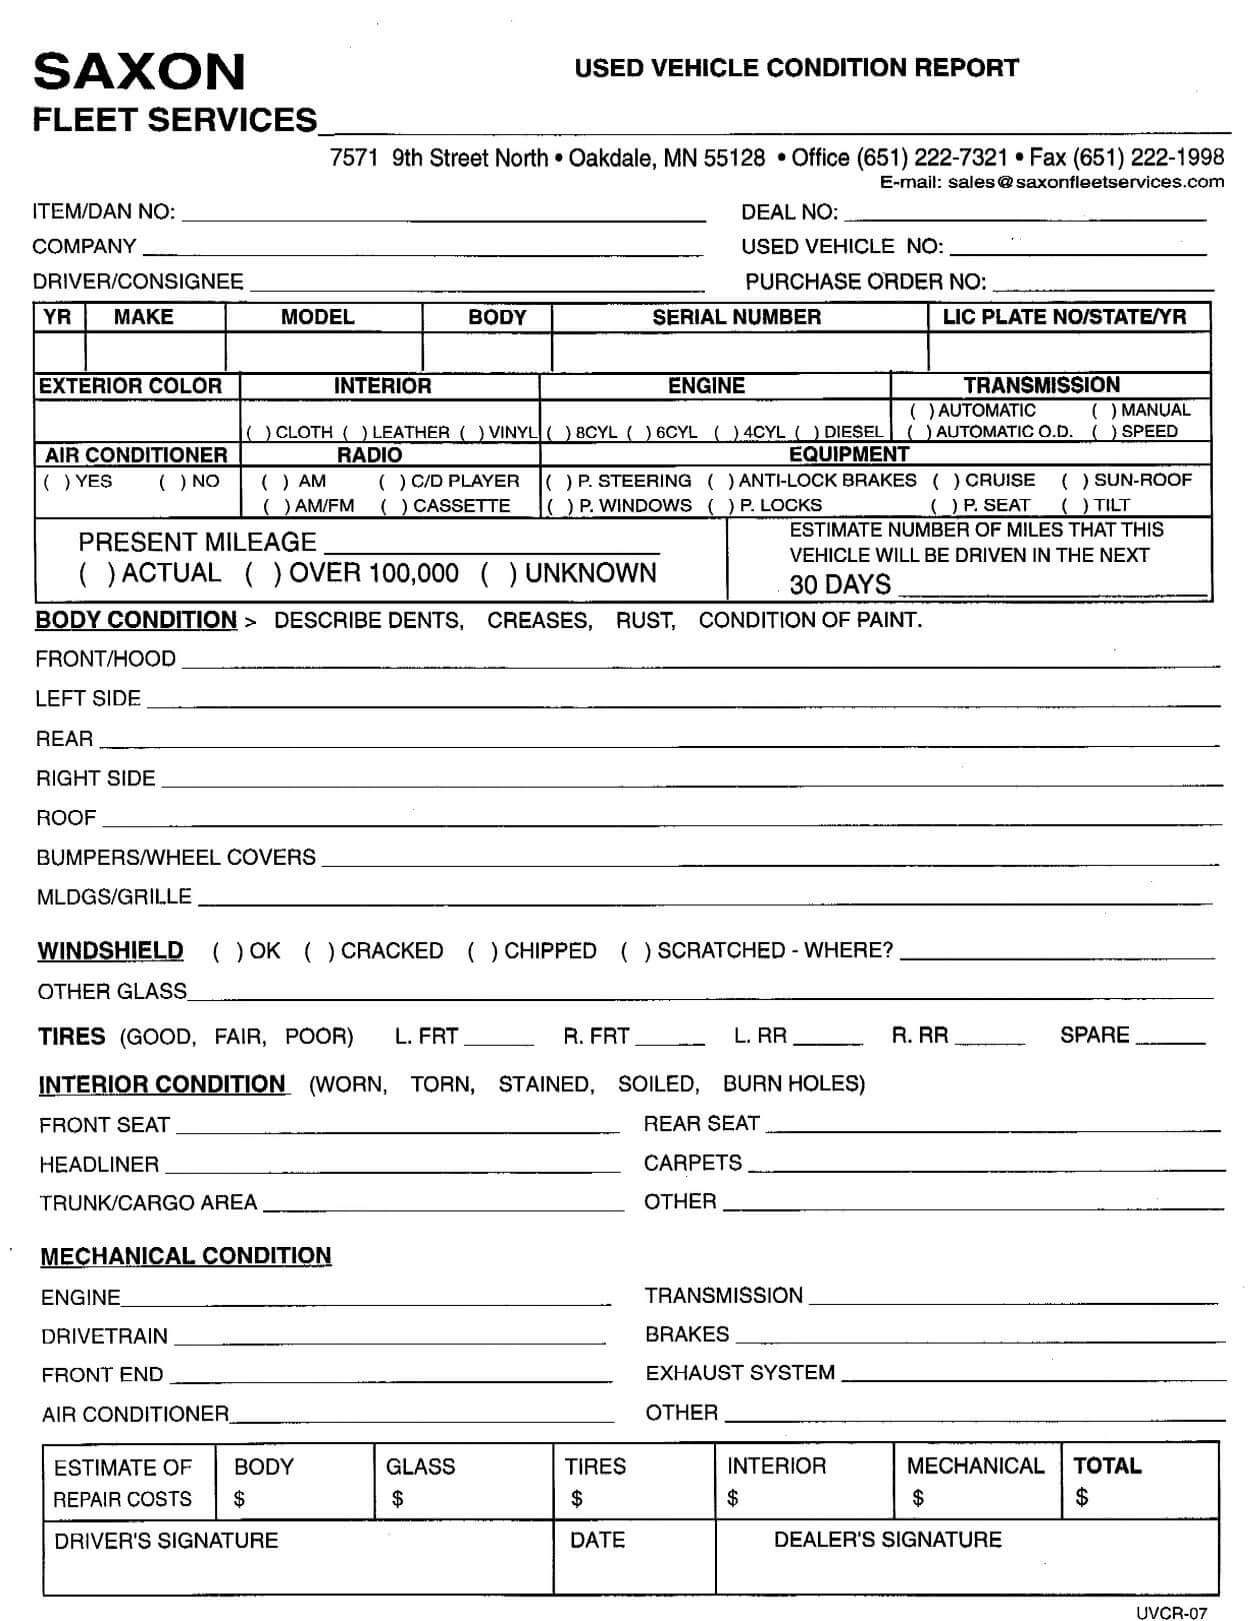 18 Images Of Truck Condition Report Template | Masorler For Truck Condition Report Template